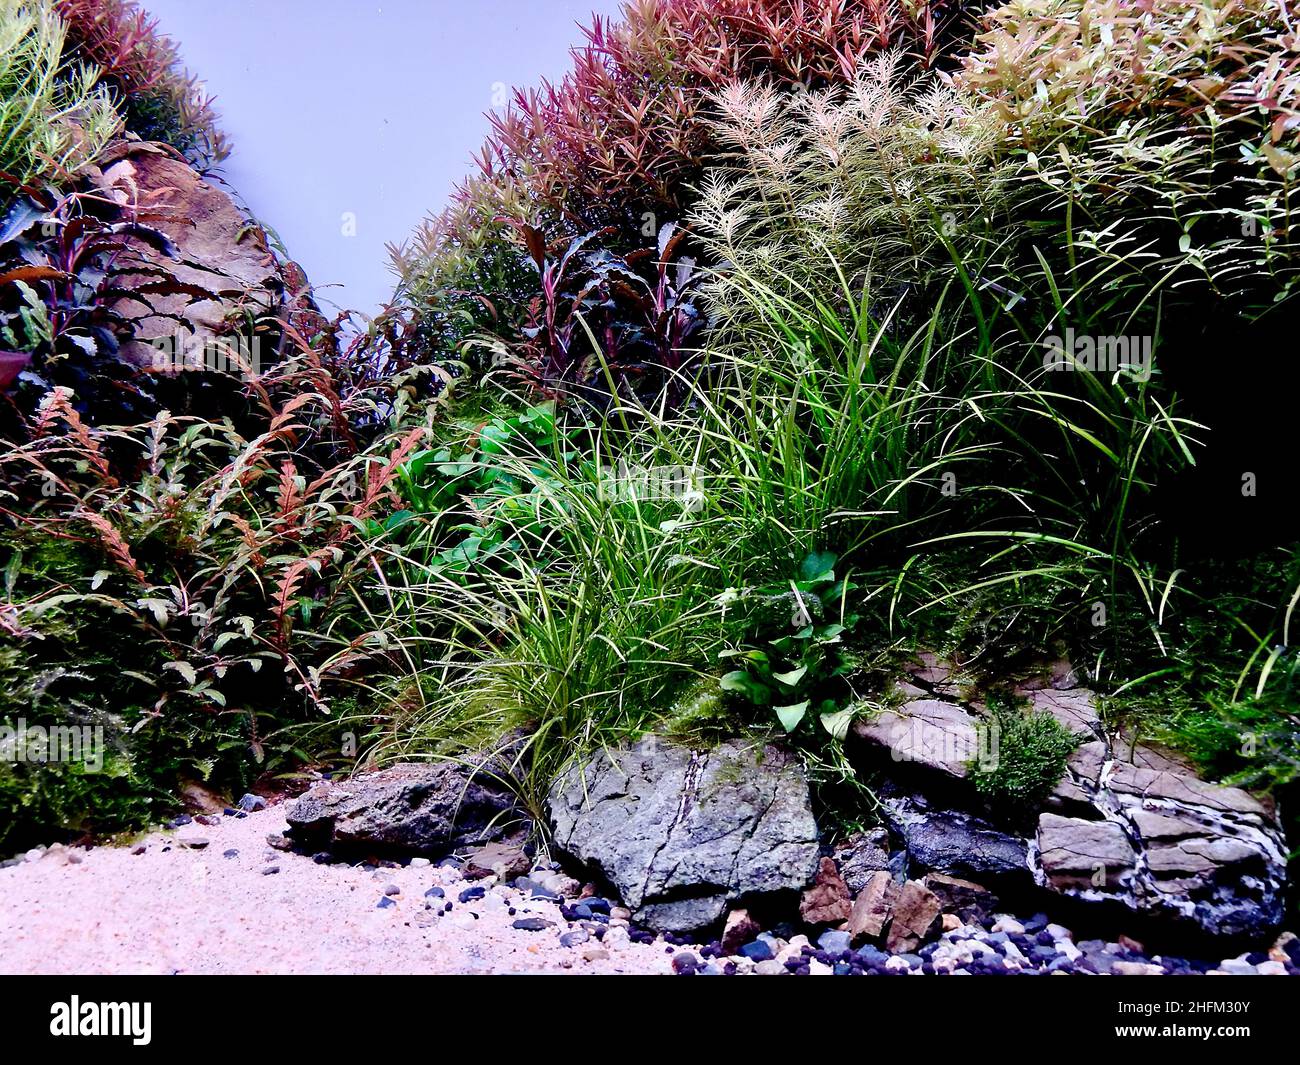 Aquascape aquarium with various freshwater plants. Green and red freshwater plants. Stock Photo